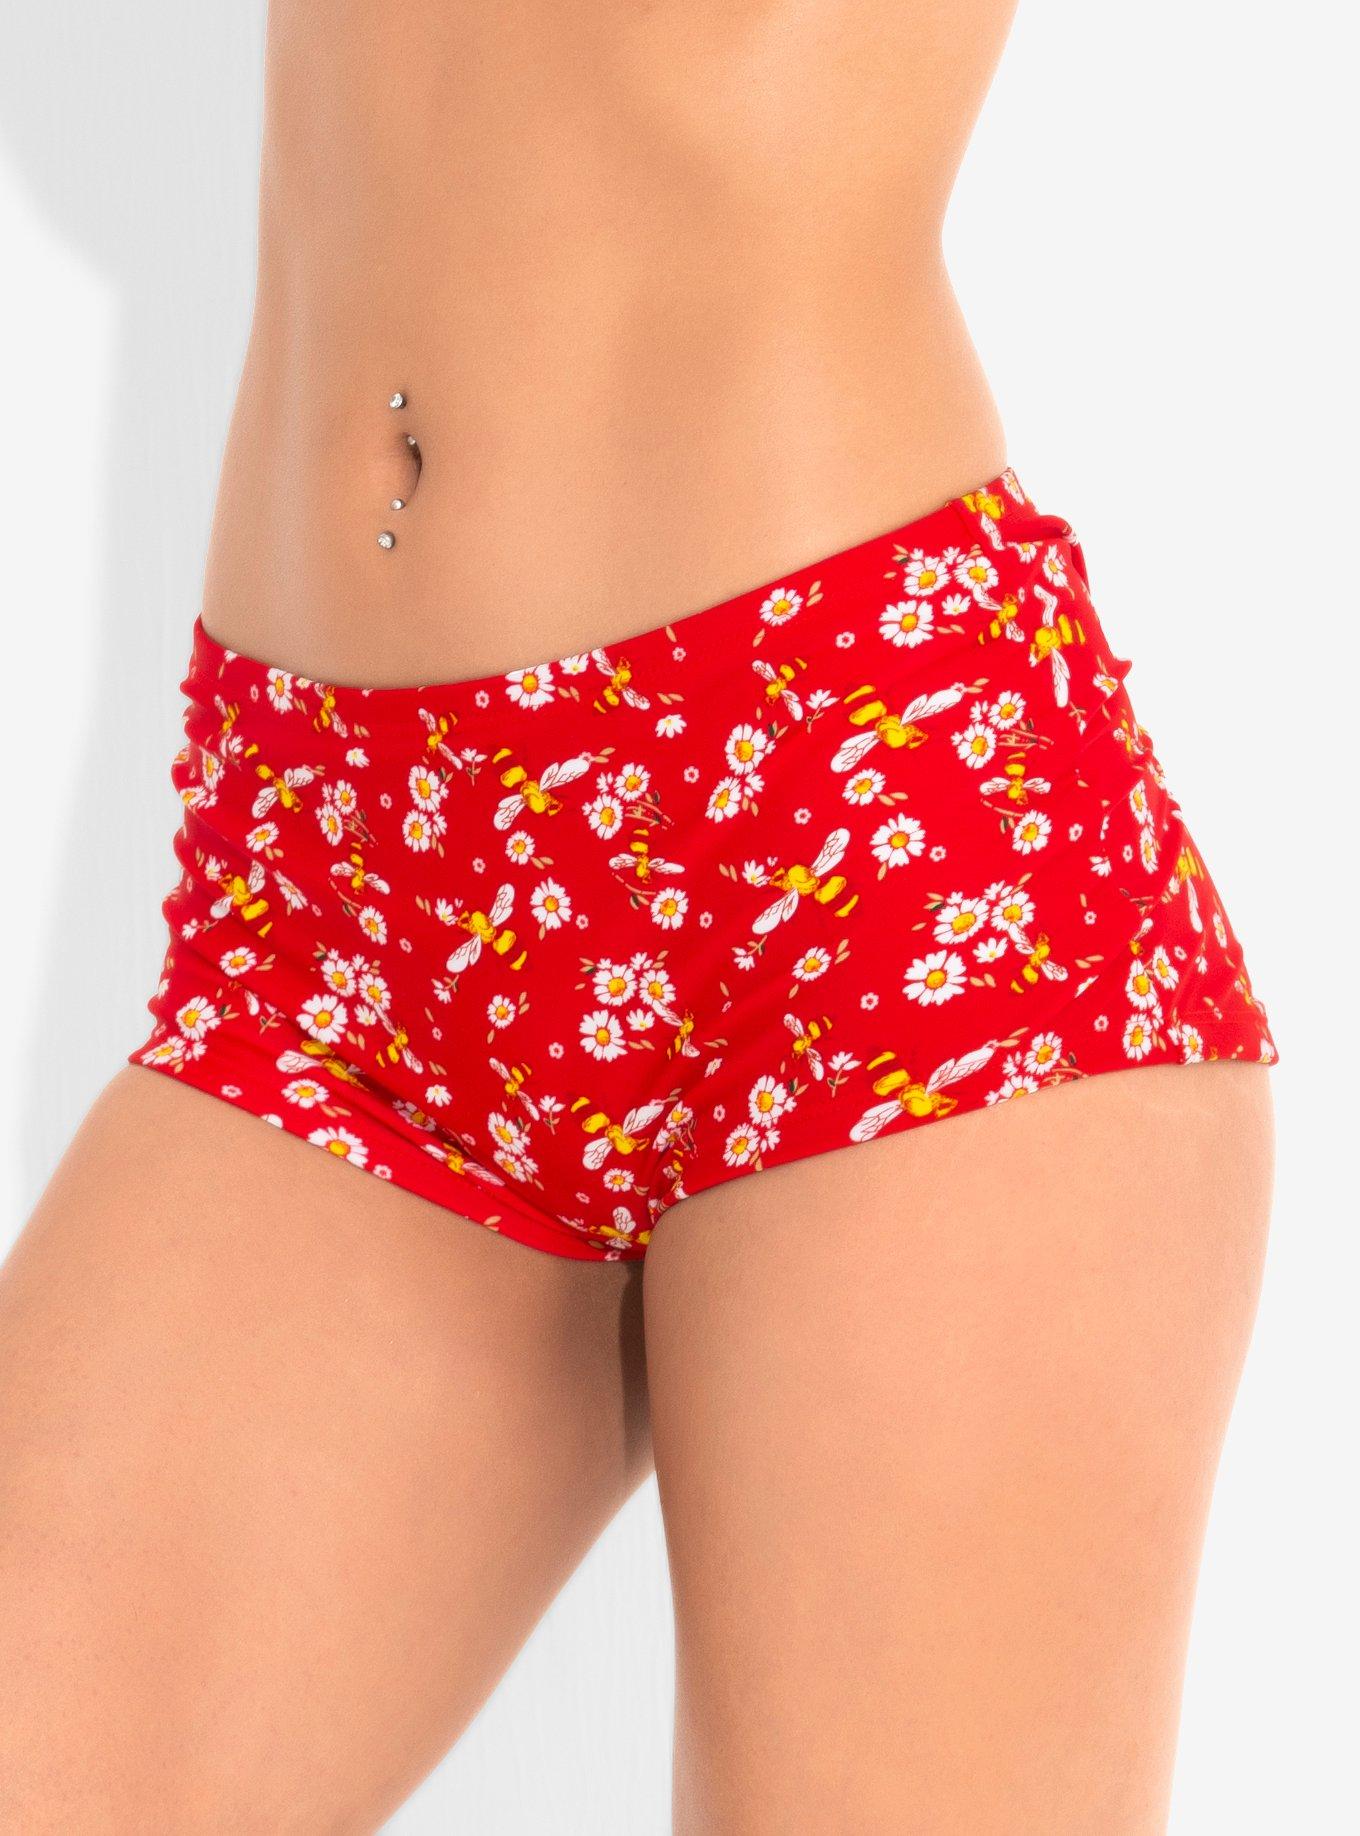 Daisy & Bumble Bee Halter Swim Bottoms, RED, hi-res